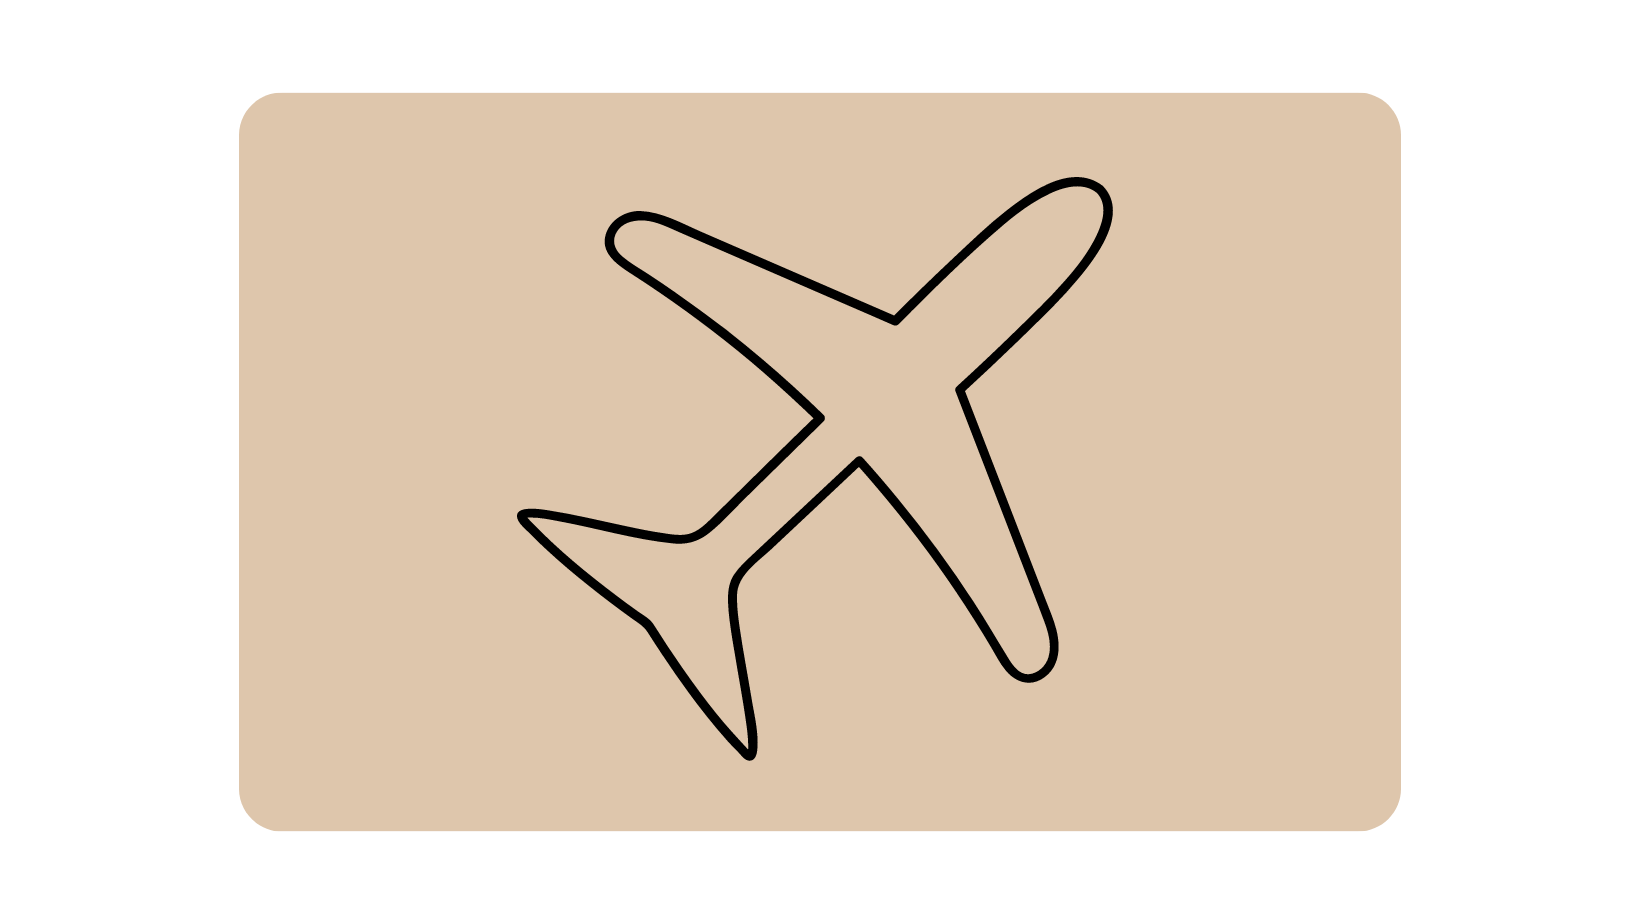 Line drawing of an airplane